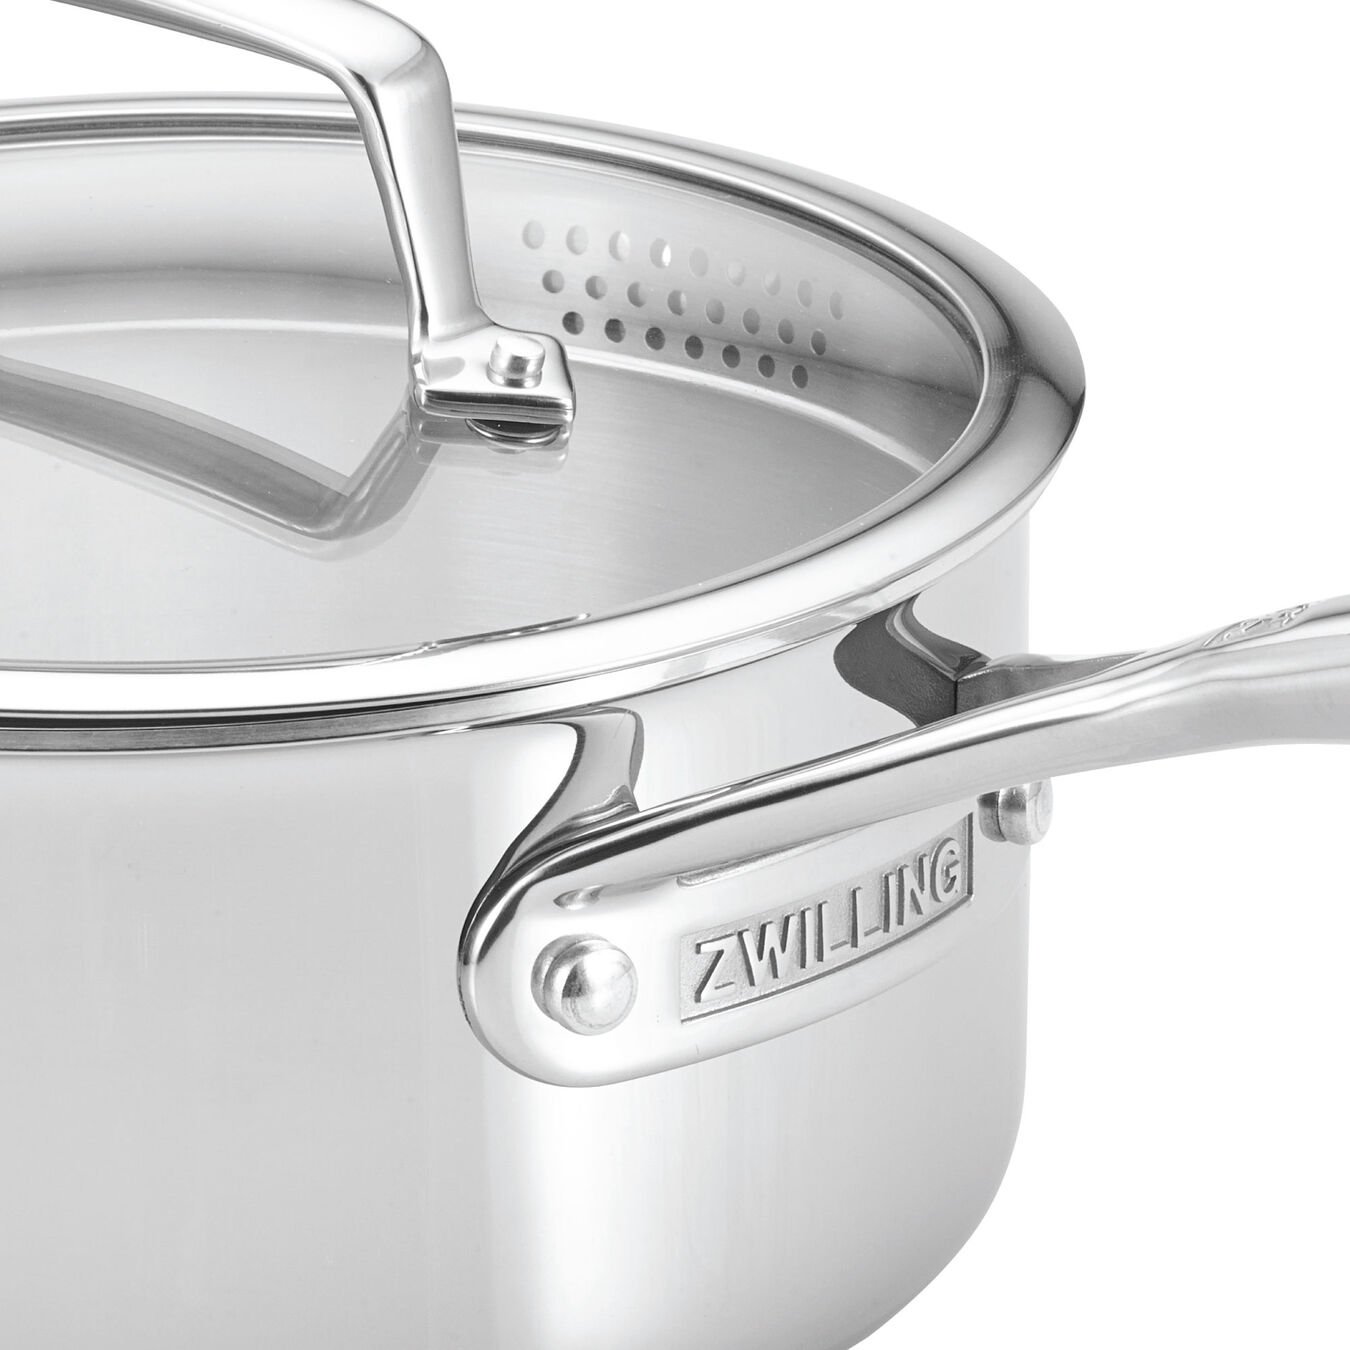 24 cm 18/10 Stainless Steel Saute pan,,large 6